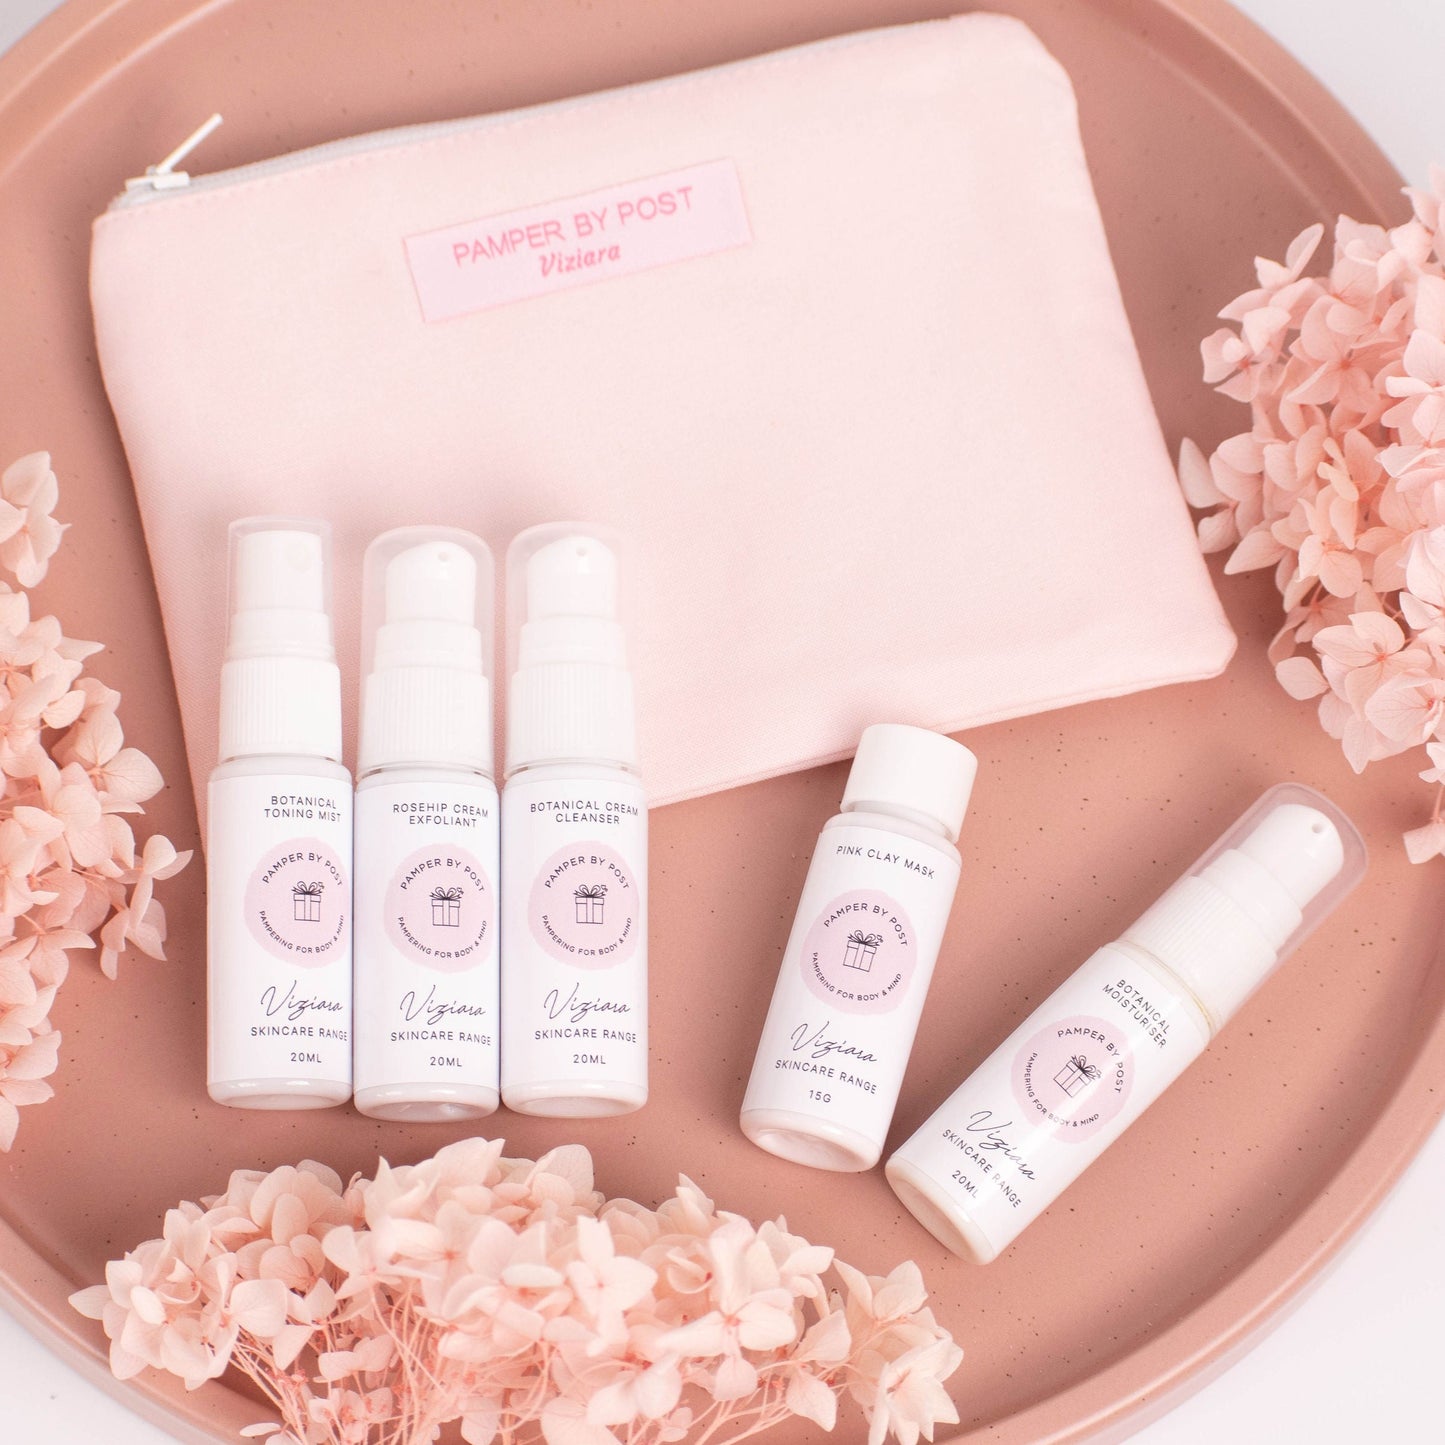 The Little Skincare Pamper Pack